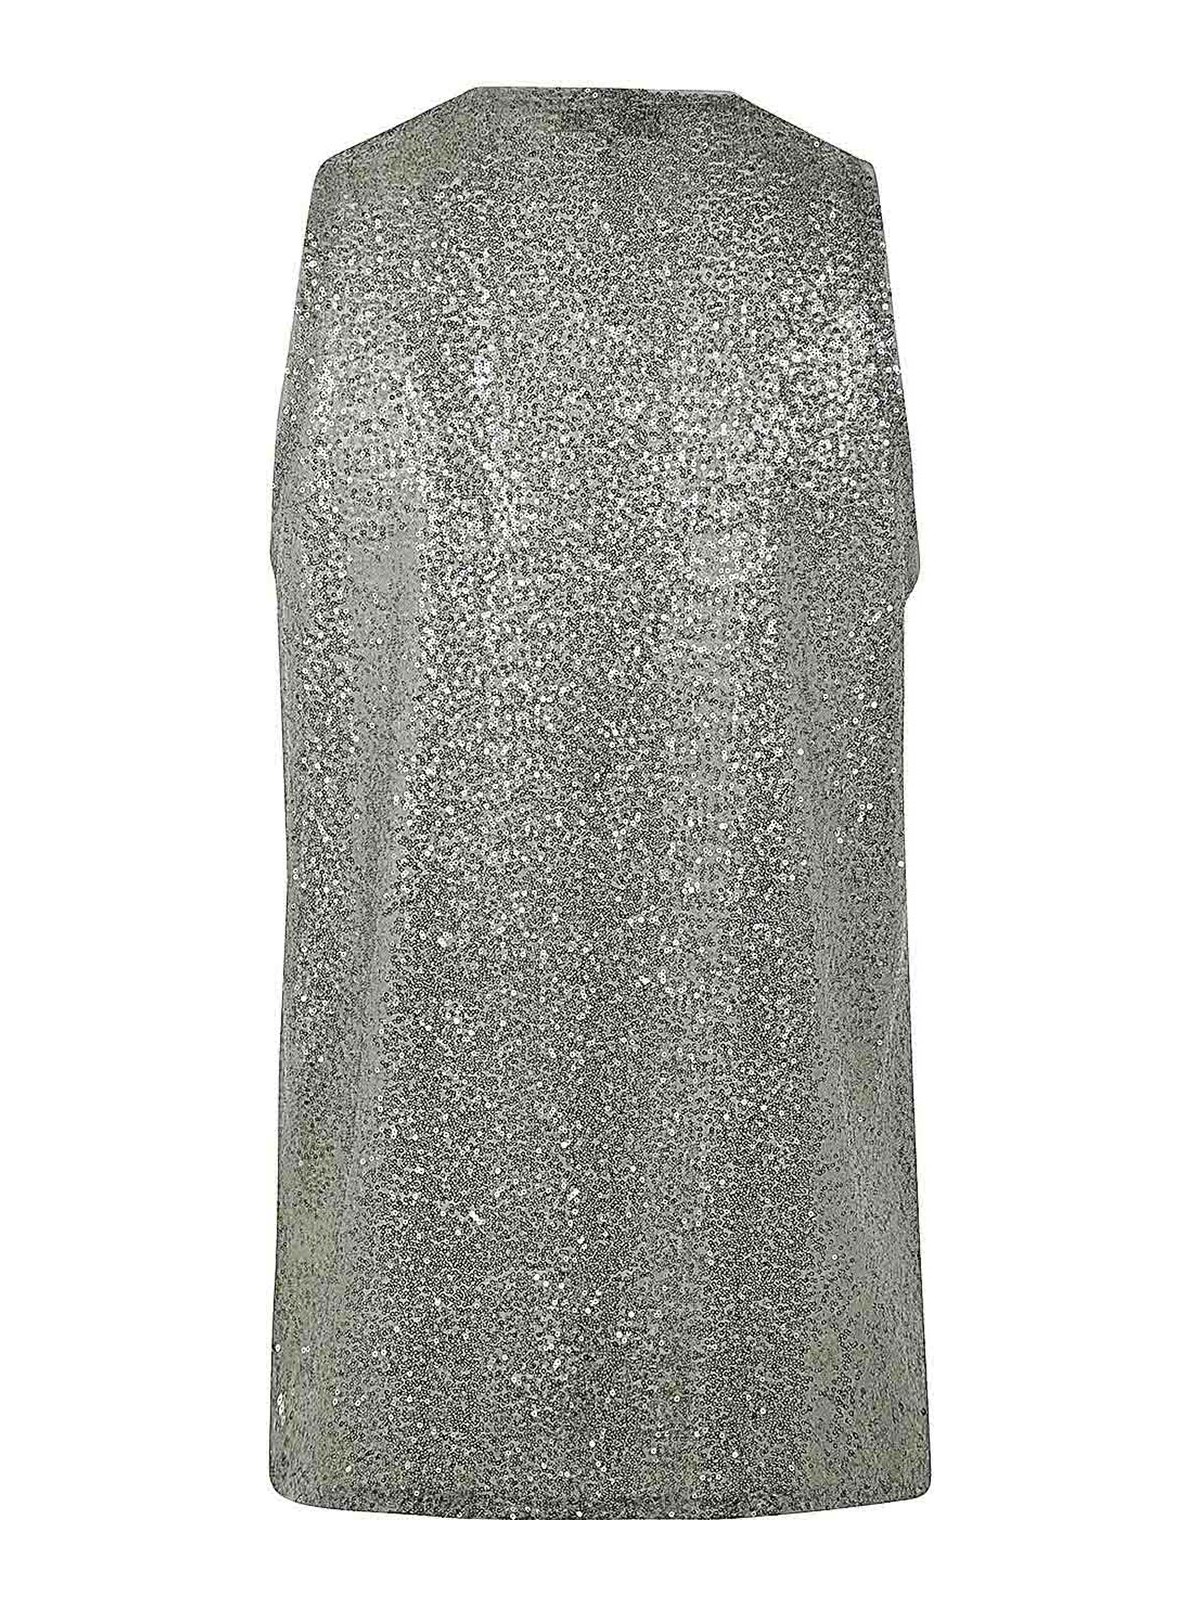 Shop Antonelli Firenze Cecil Top With Paillettes In Silver